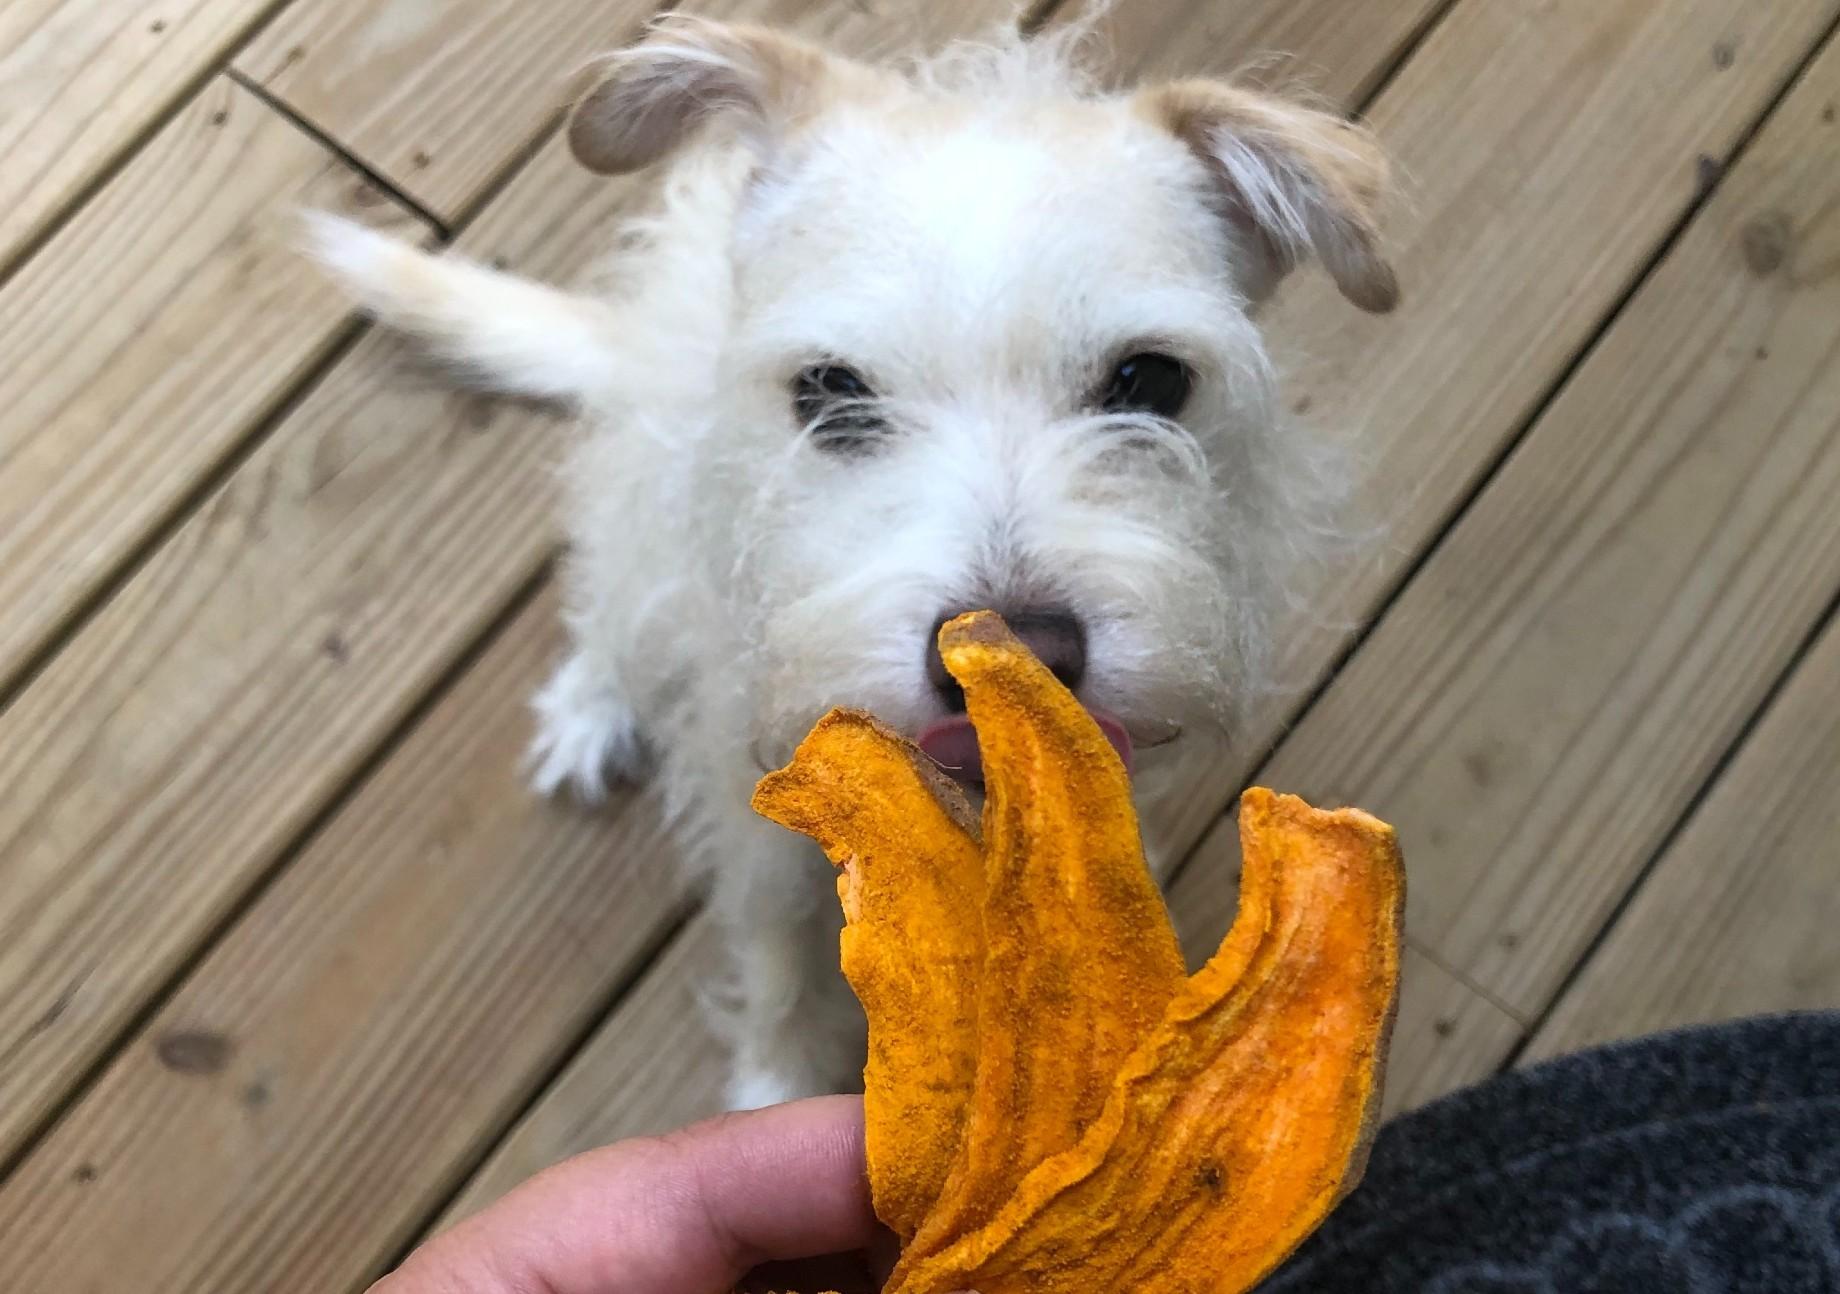 There's no turkey in this jerky.